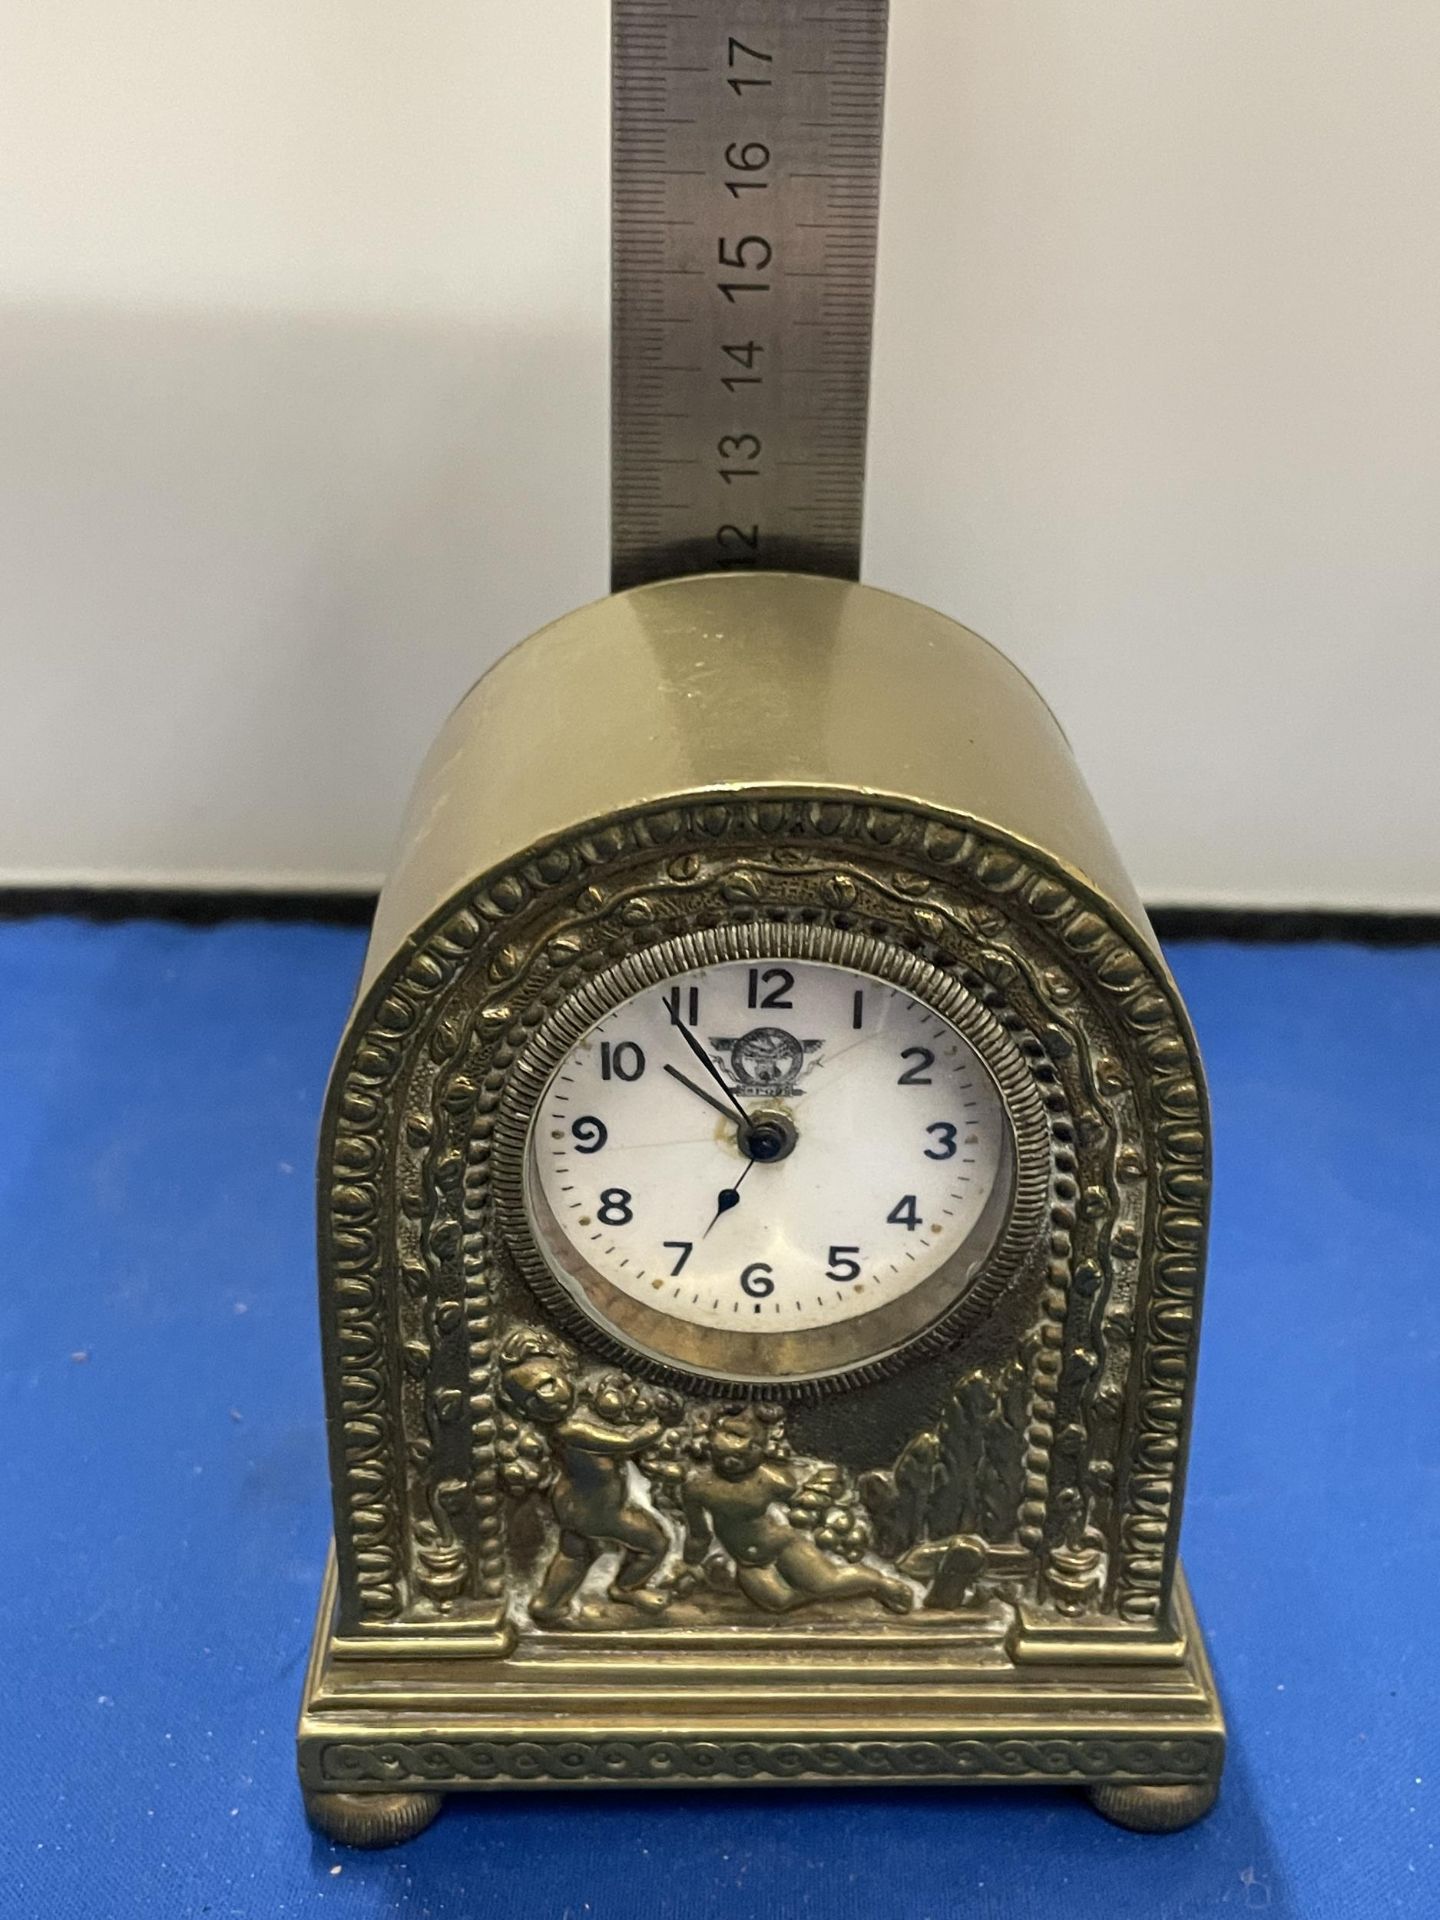 AN ITALIAN CLASSICAL BRASS MANTLE CLOCK WITH CHERUB DESIGN HEIGHT 12CM - Image 4 of 4